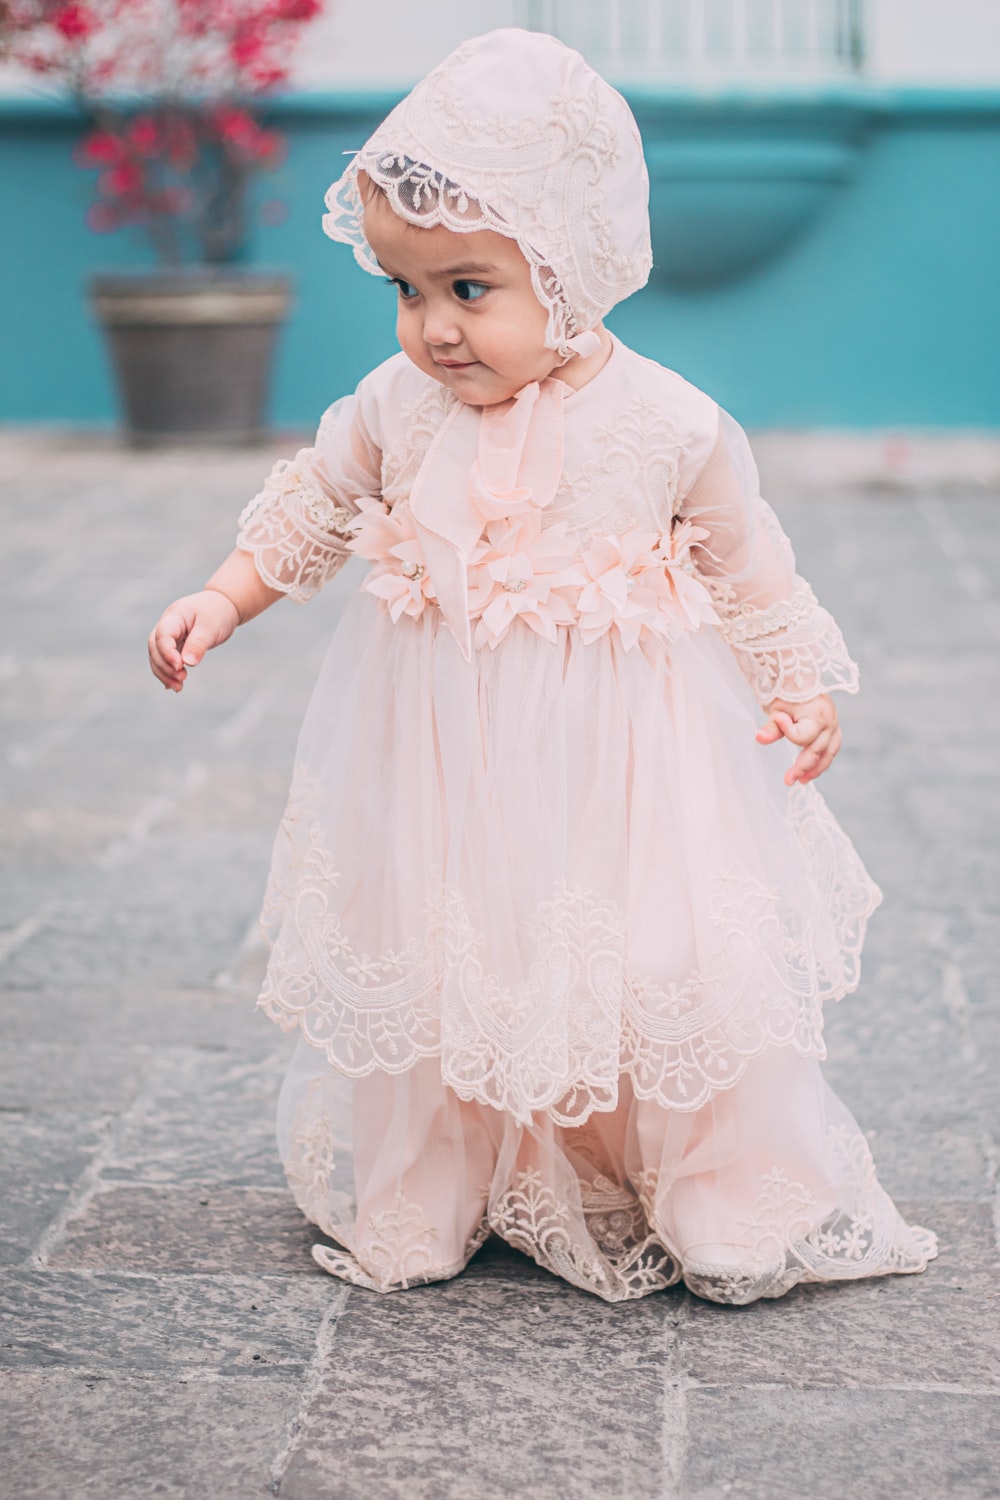 Baby Dress Picture. Download Free Image